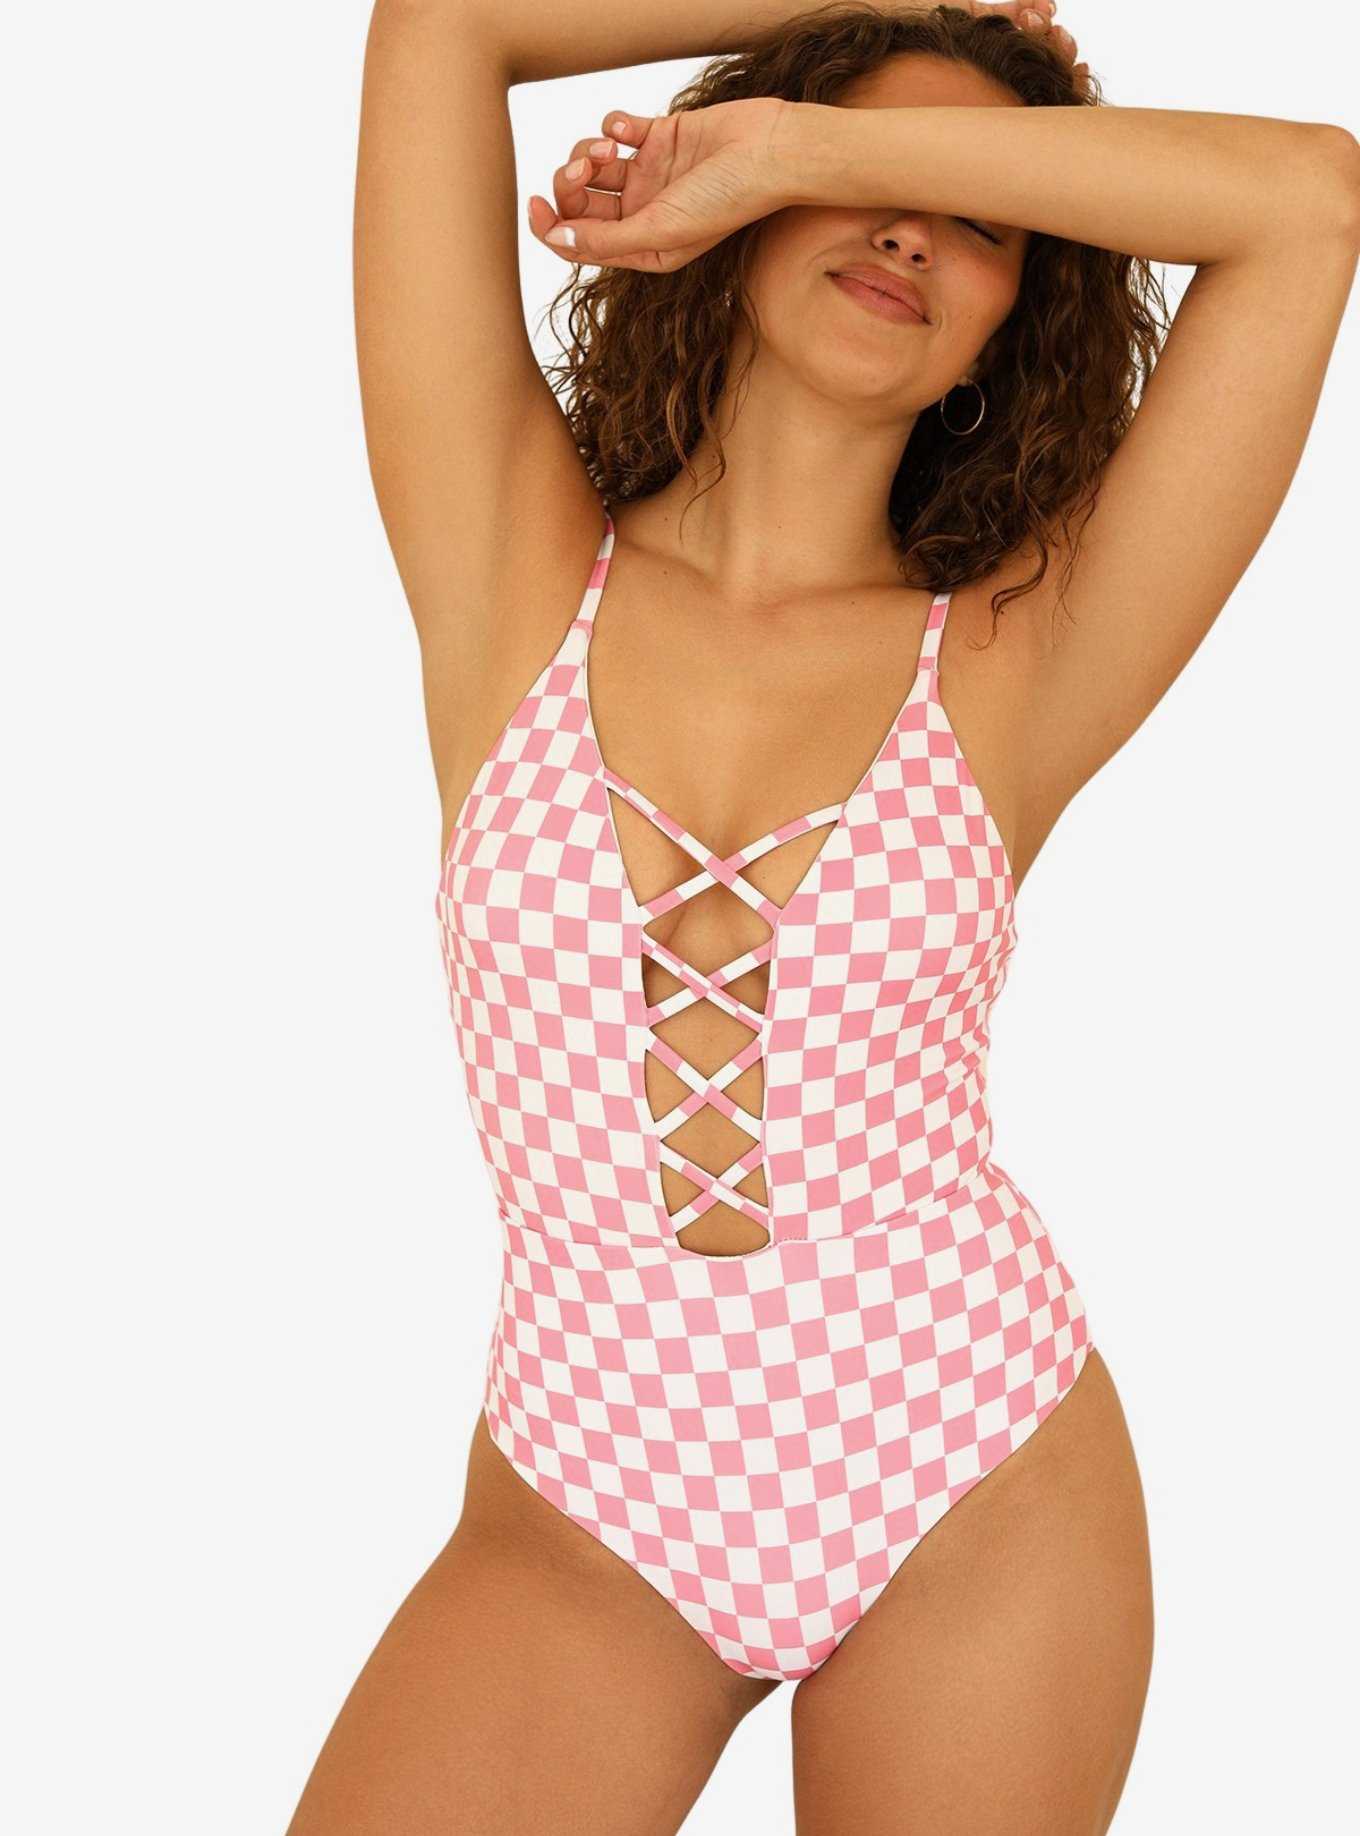 Bring On The Bliss - One-Piece Swimsuit for Women